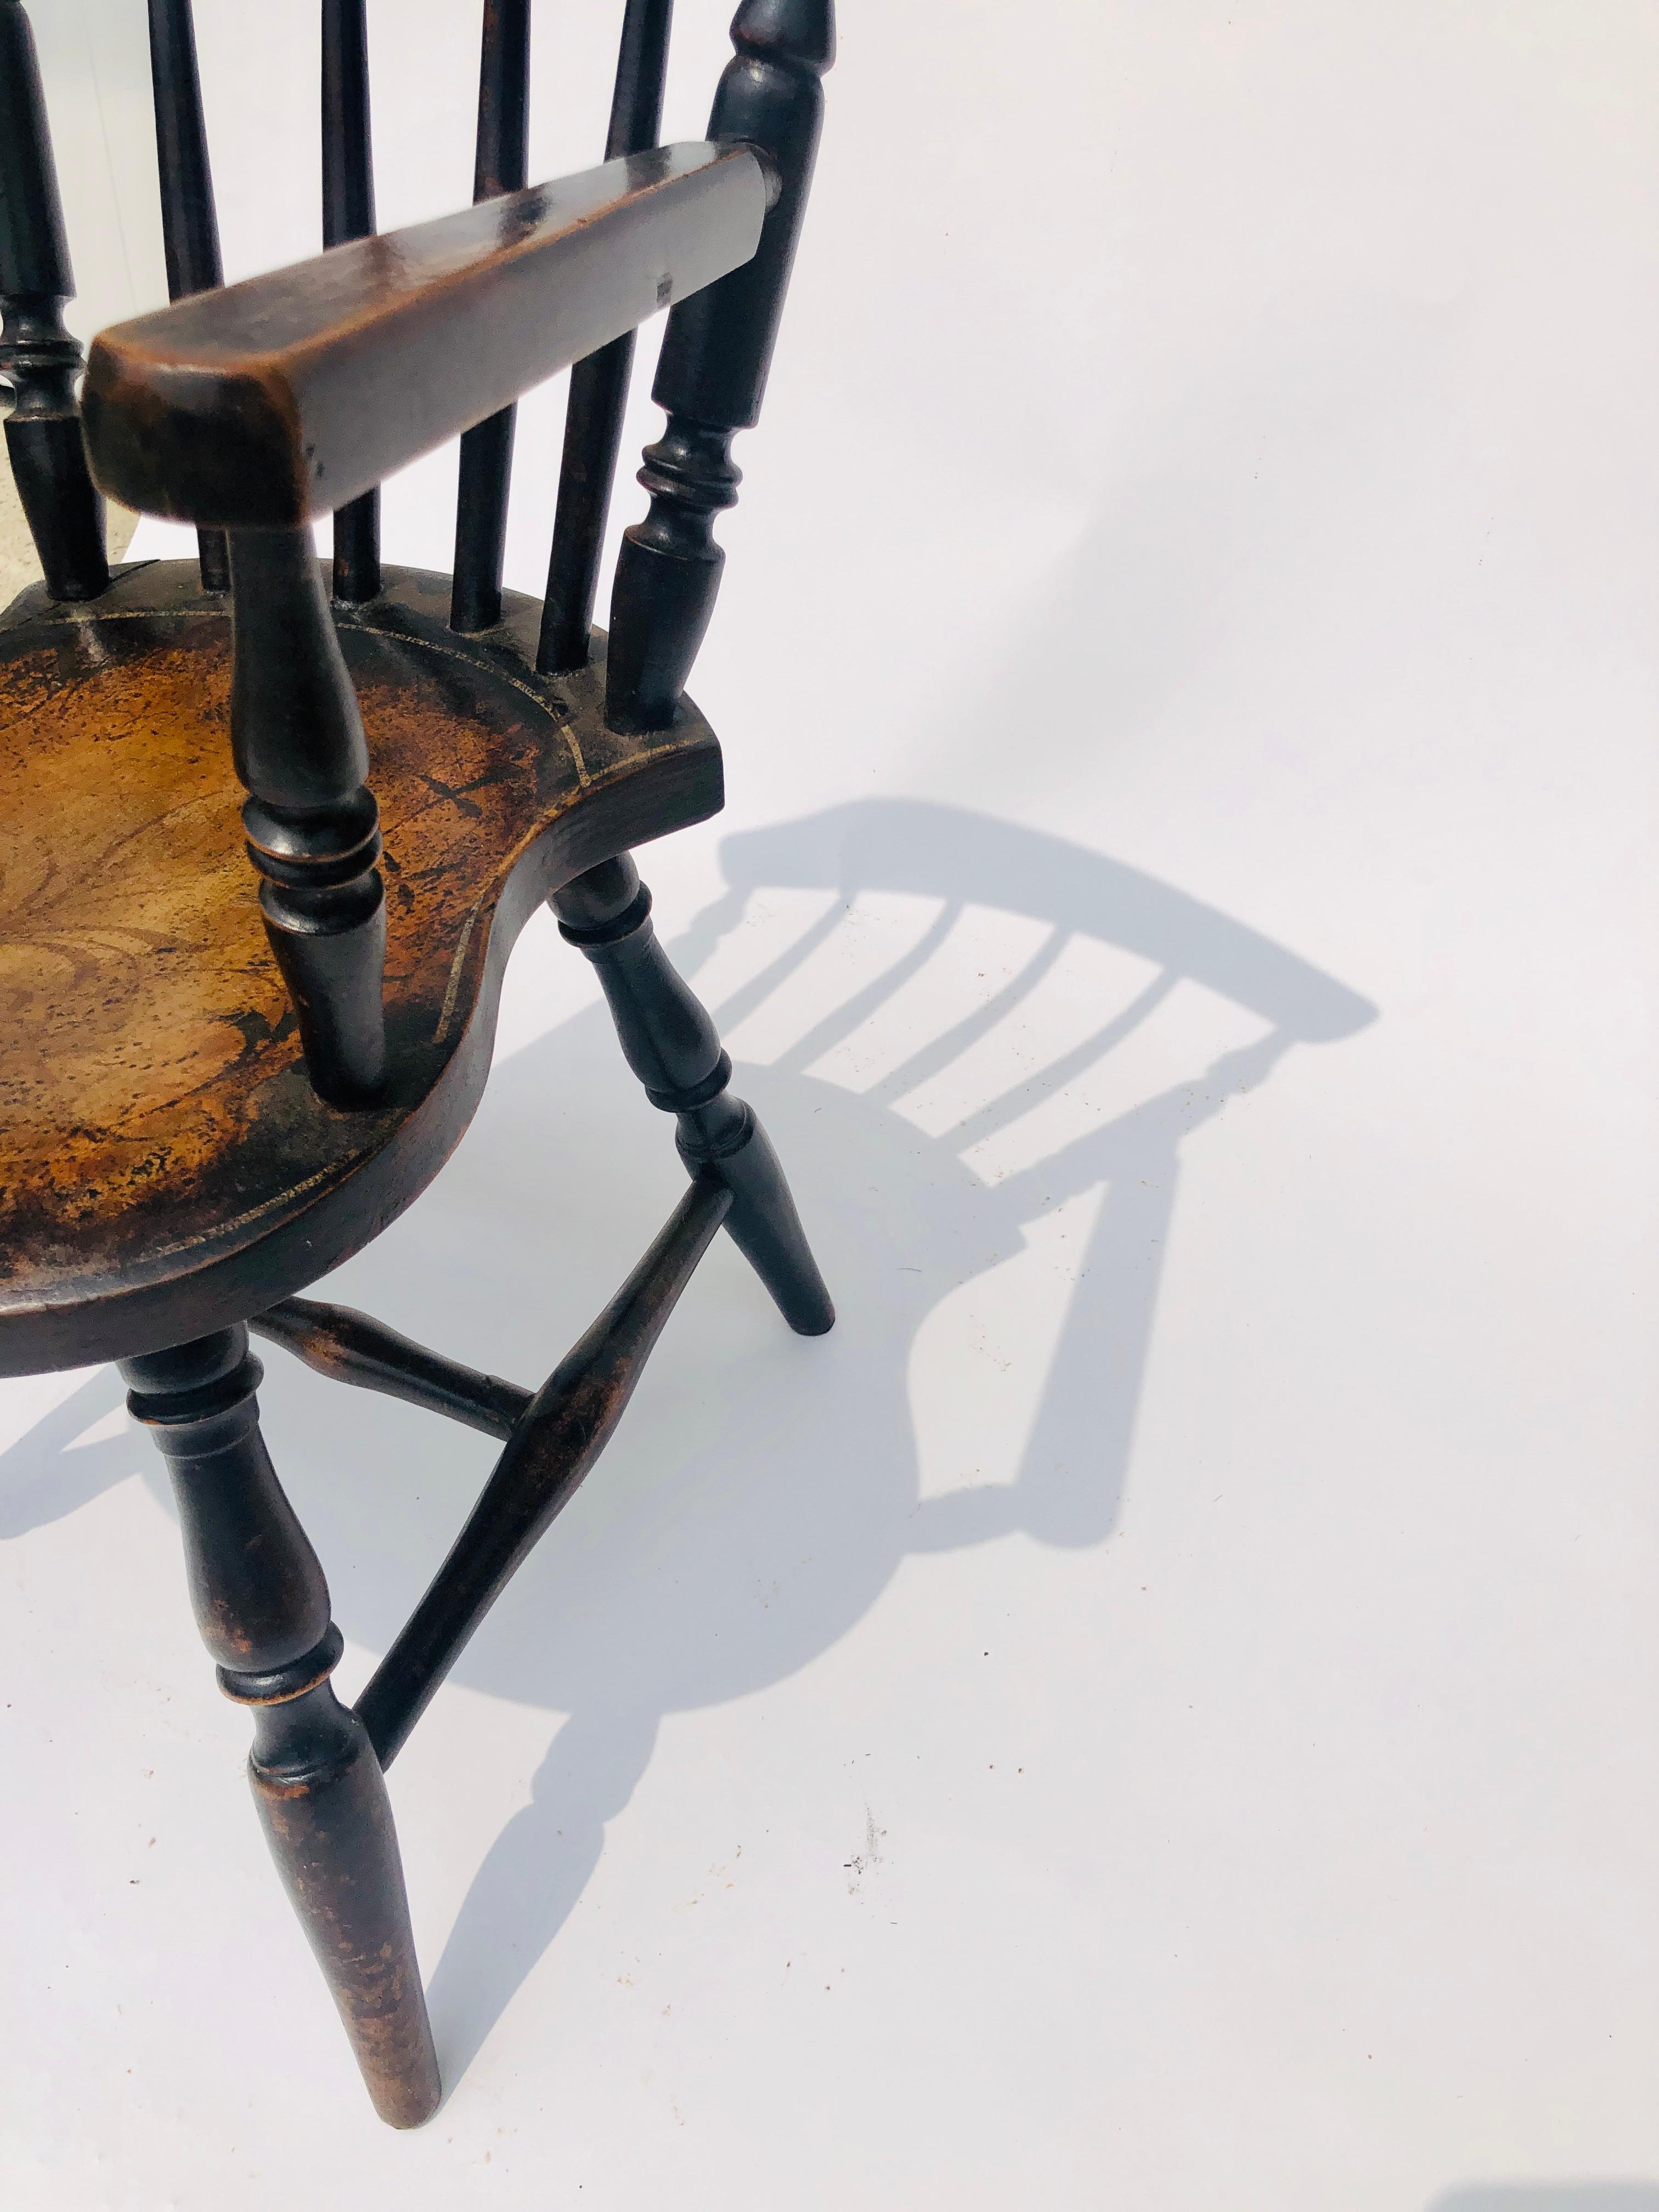 19th Century Antique Victorian Child’s Chair In Good Condition For Sale In Suffolk, GB